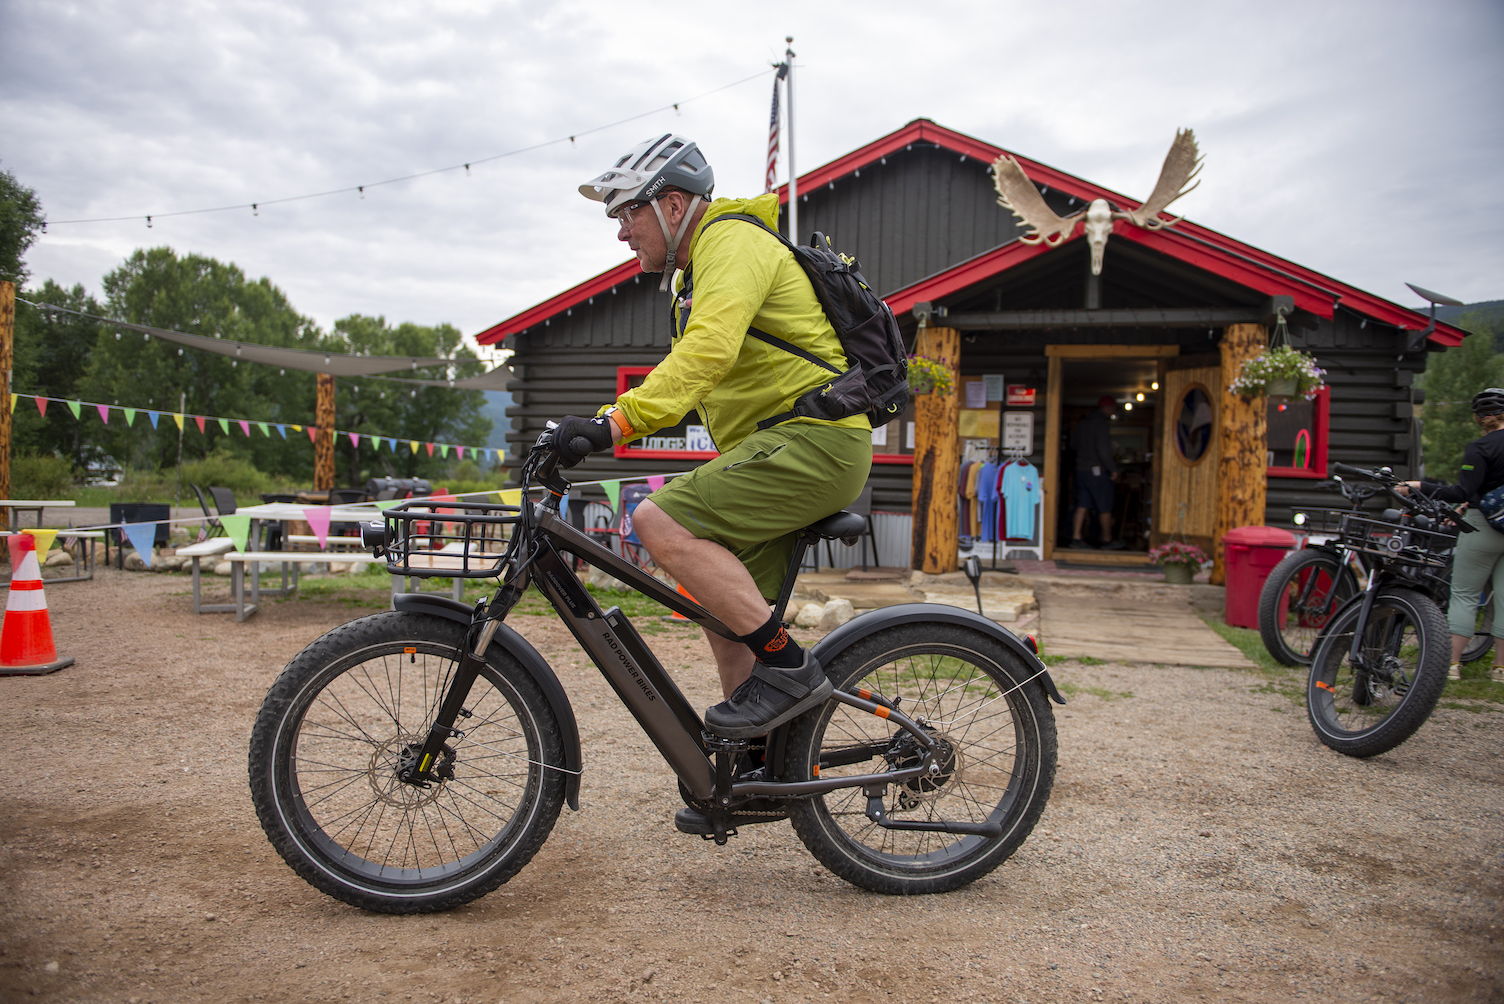 A person riding a bike in front of a rural gunnison county lodging in pitkin. The building is log cabin-style and has mouse antlers mounted above the door